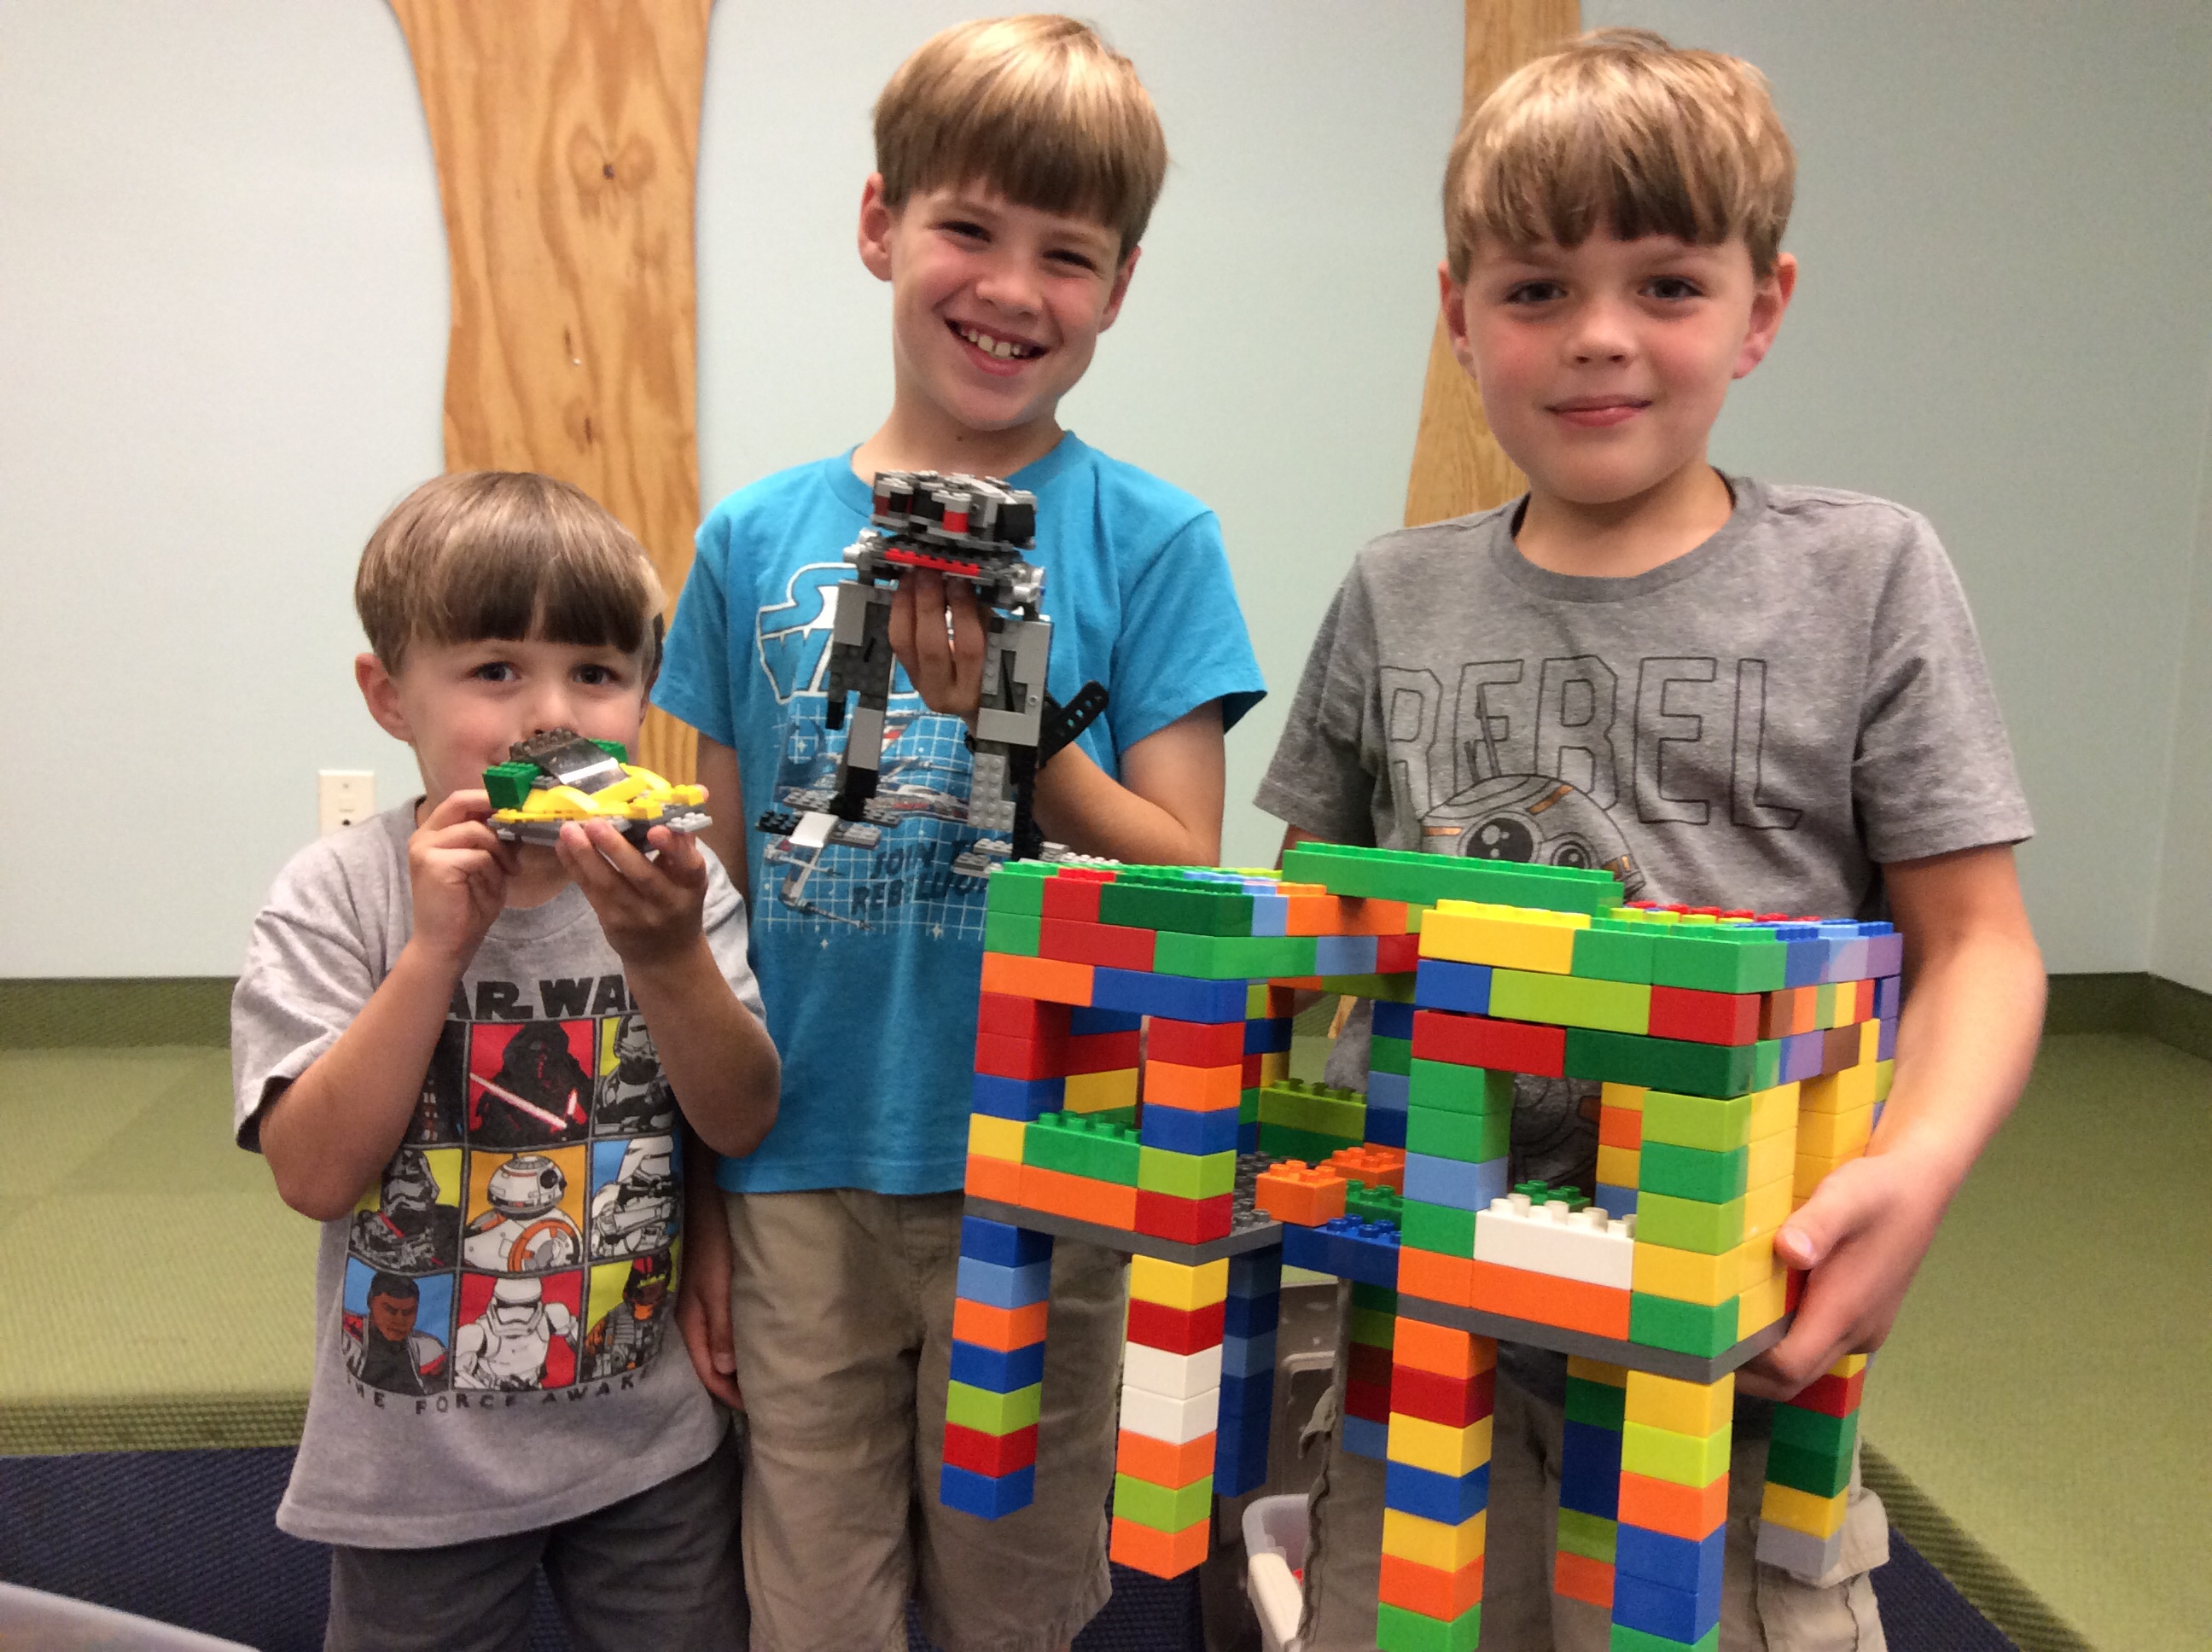 Three young patrons with their LEGO brick creations.